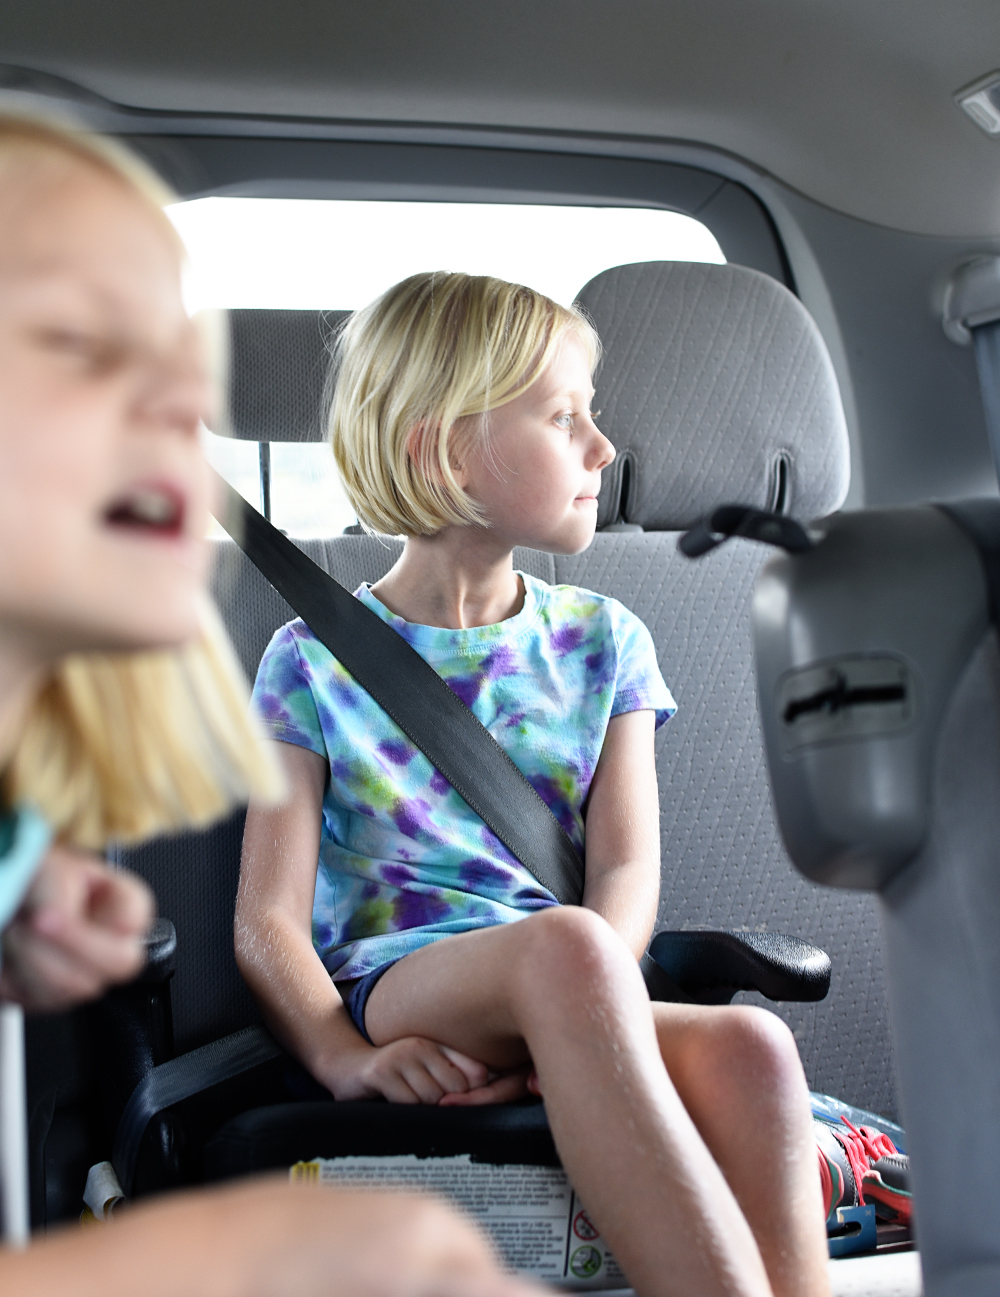 Sing all your favorite songs on a screen-free road trip with kids